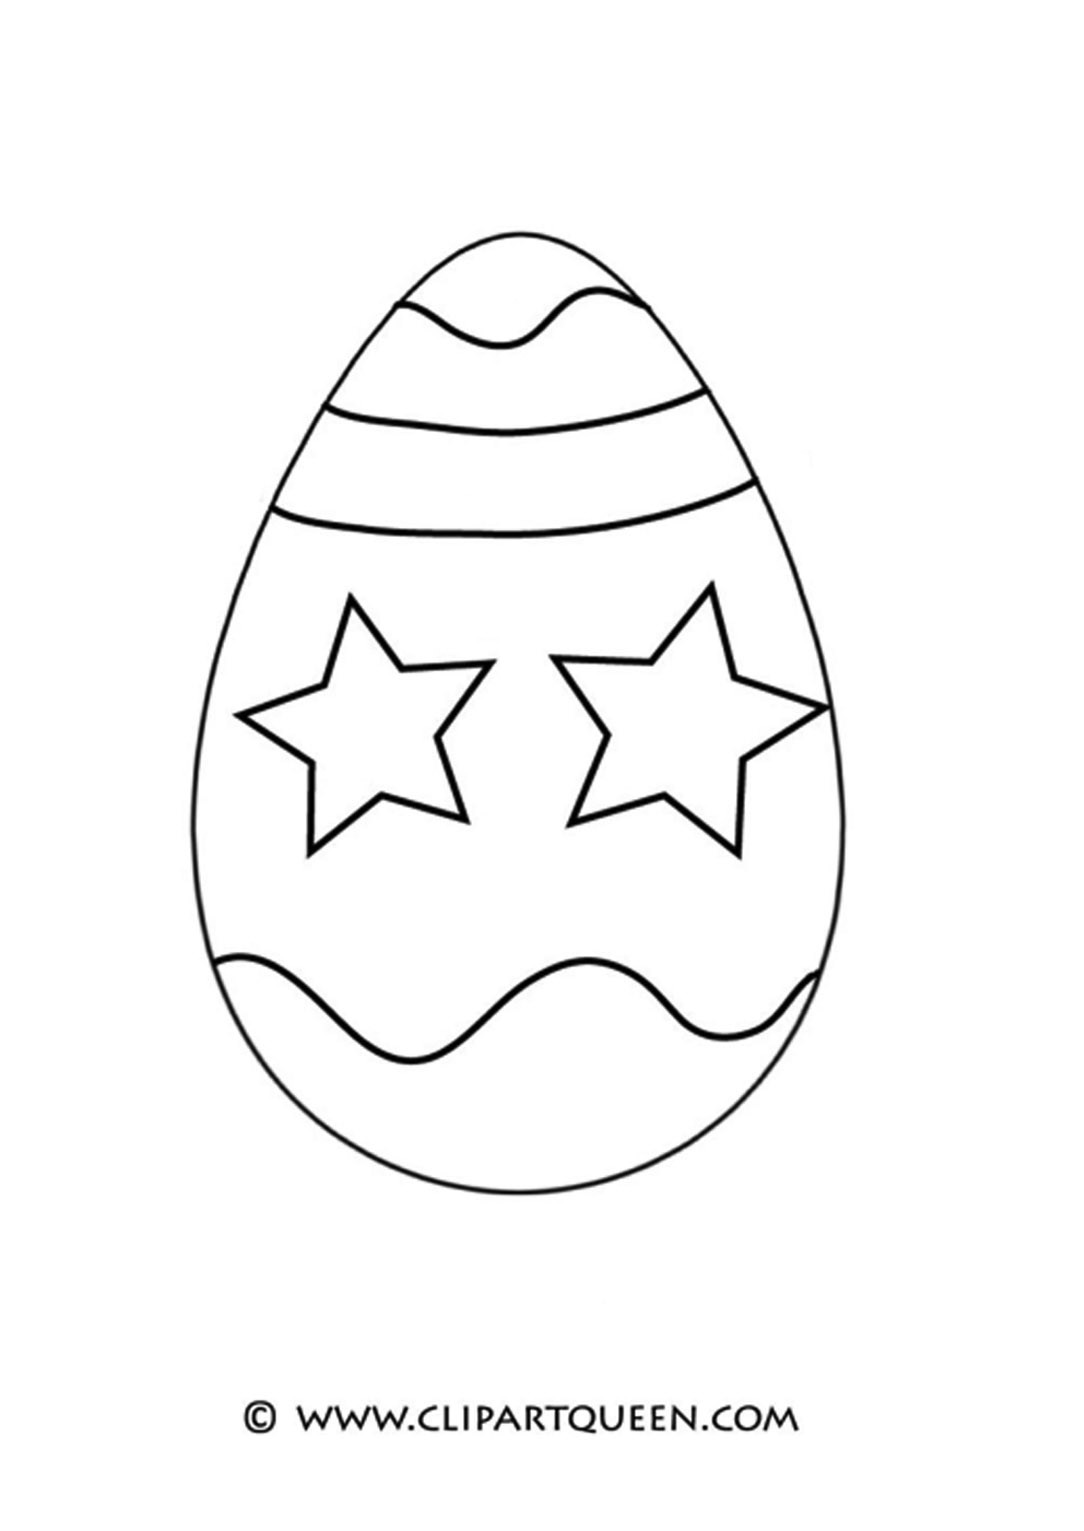 Girls Are Not Chicks Coloring Book
 Easter Coloring Pages